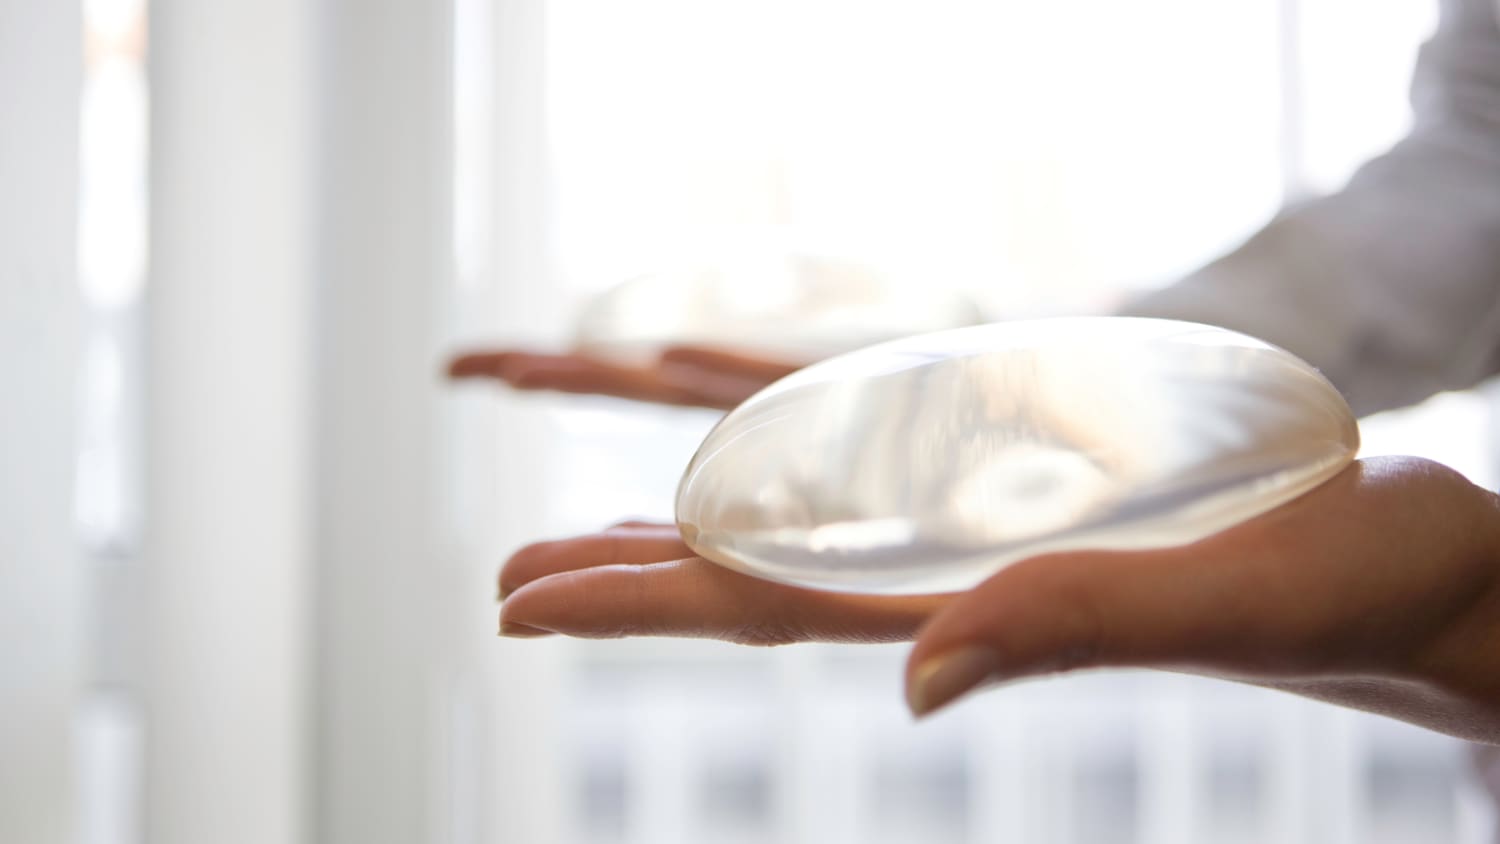 Hands holding a round, silicone breast implant.